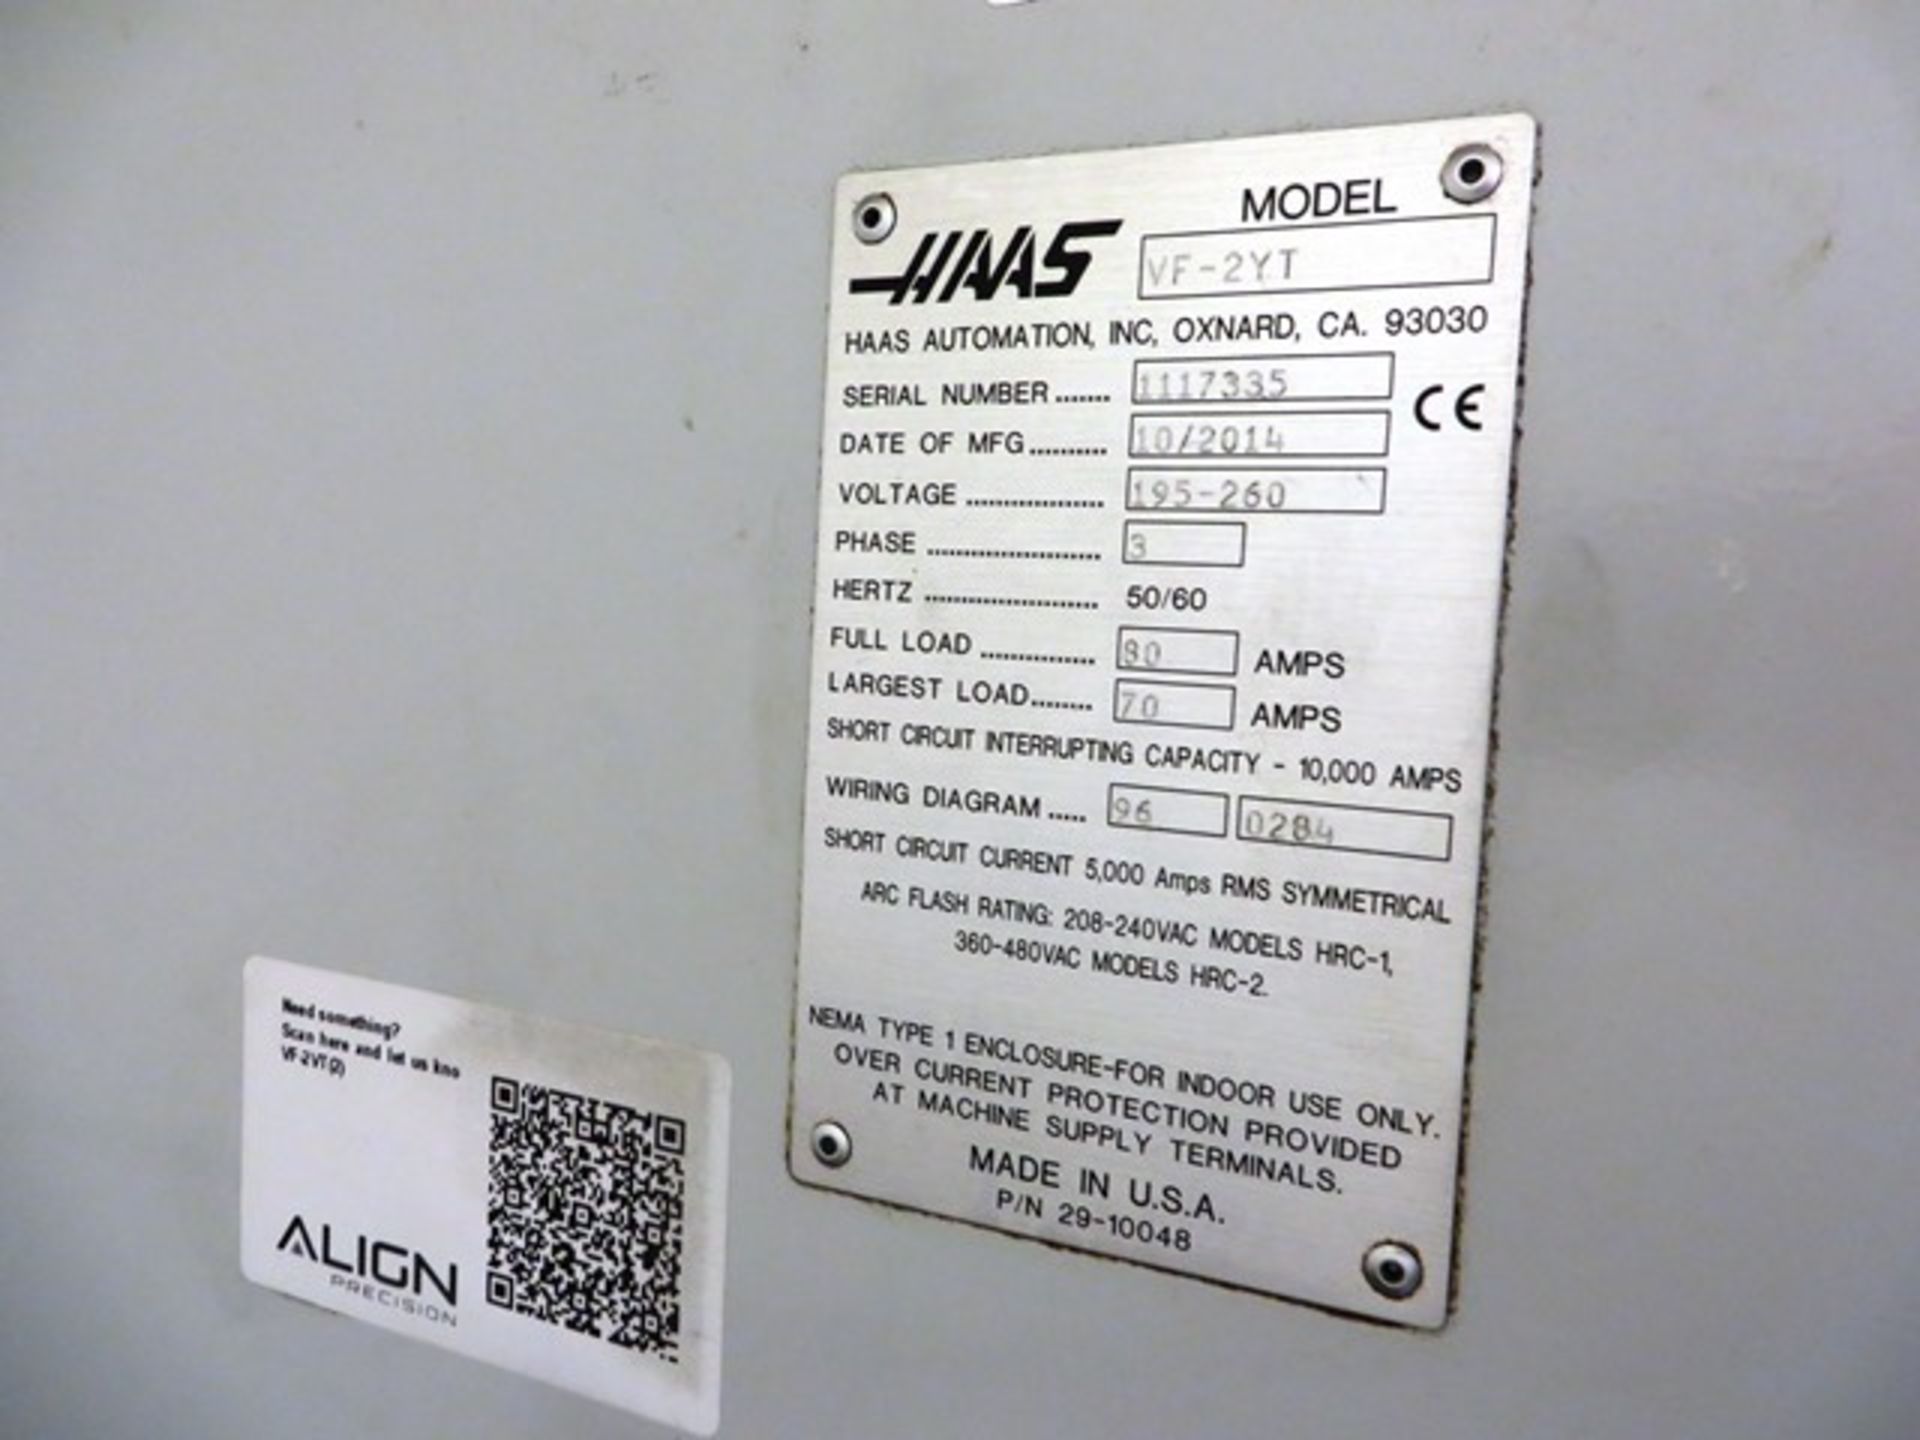 Haas VF2YT 4-Axis CNC Vertical Machining Center - Image 7 of 7